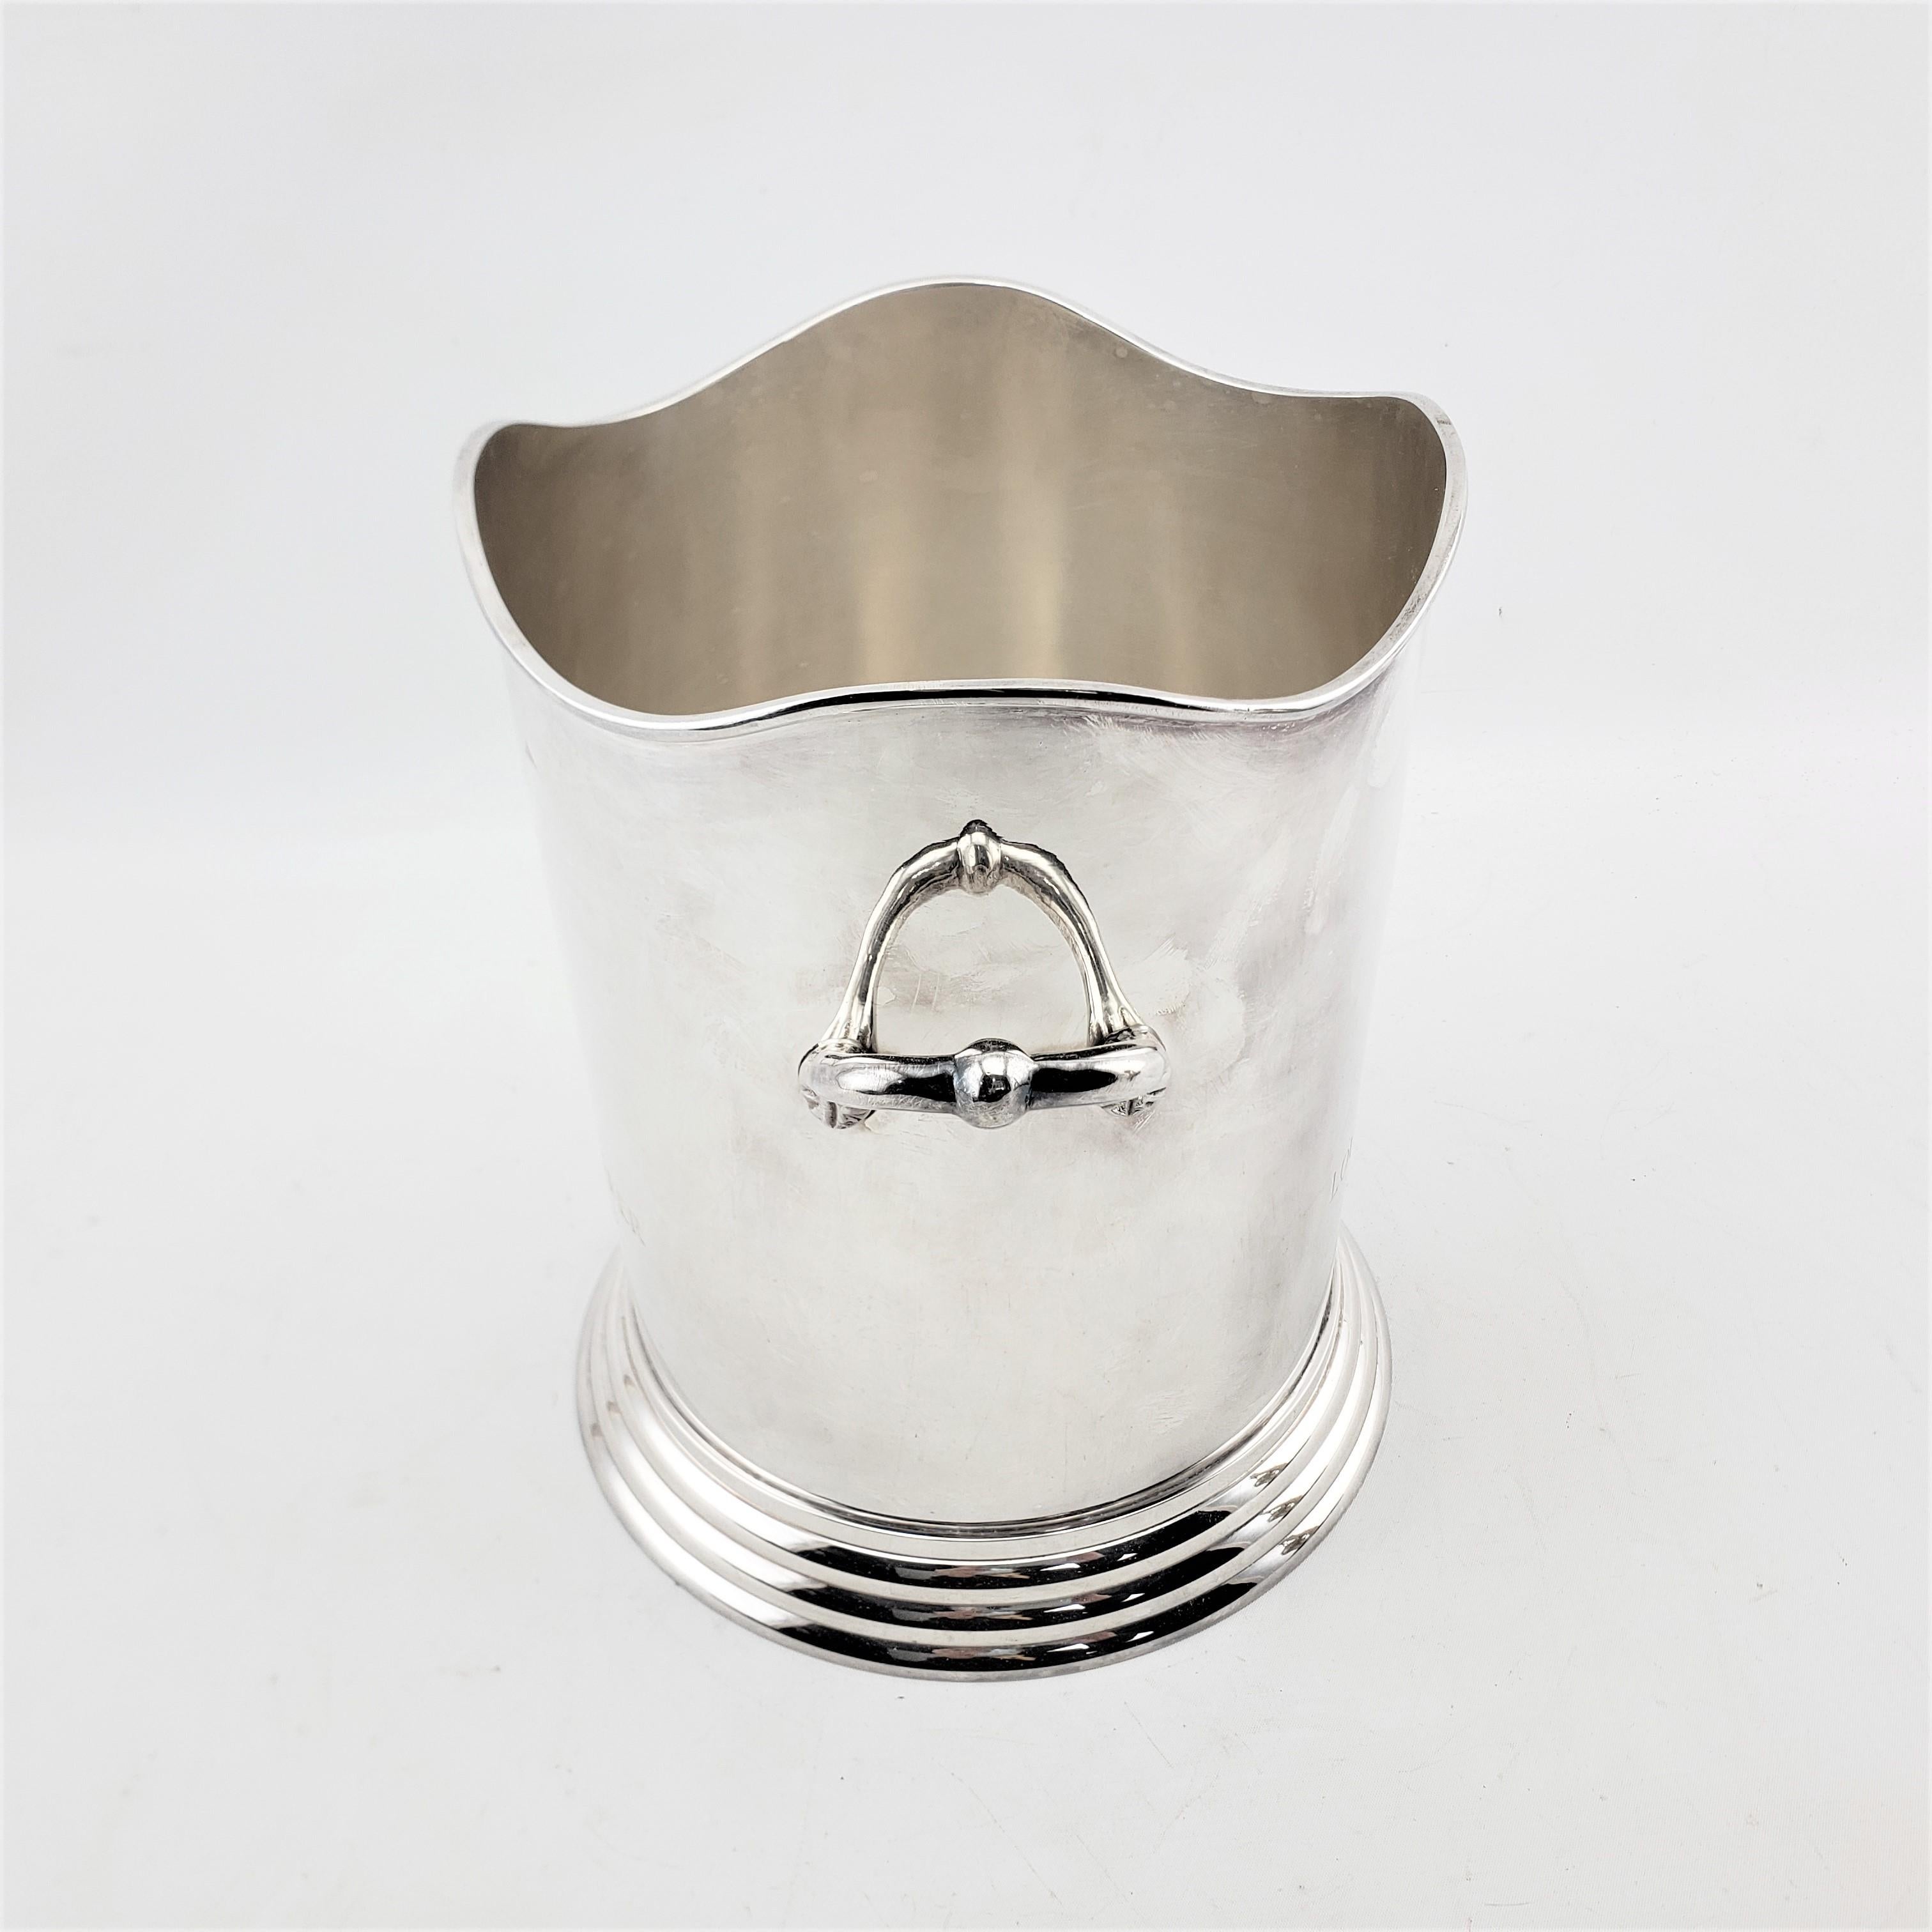 French Louis Roederer Commemorative Mid-Century Era Chrome Plated Champagne Bucket For Sale